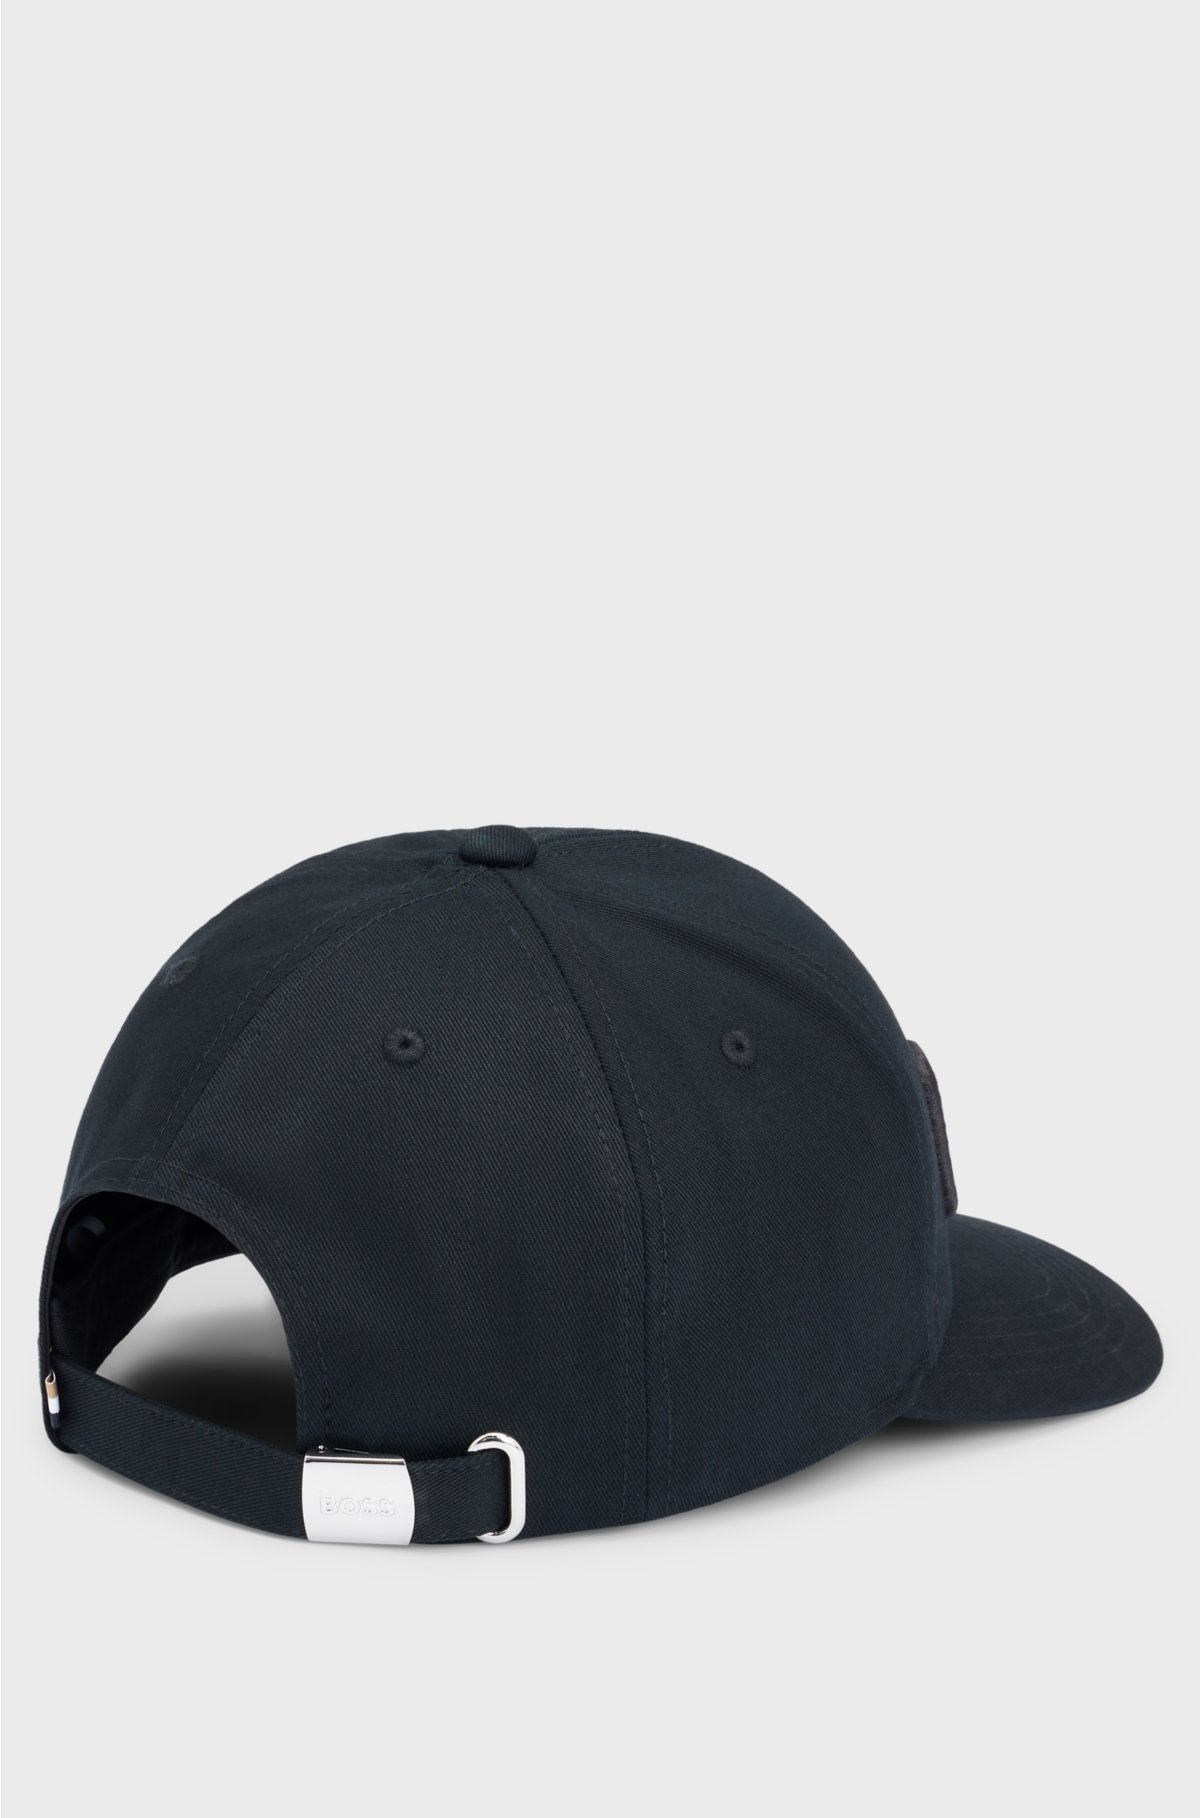 Cotton-twill five-panel cap with embroidered logo, Black